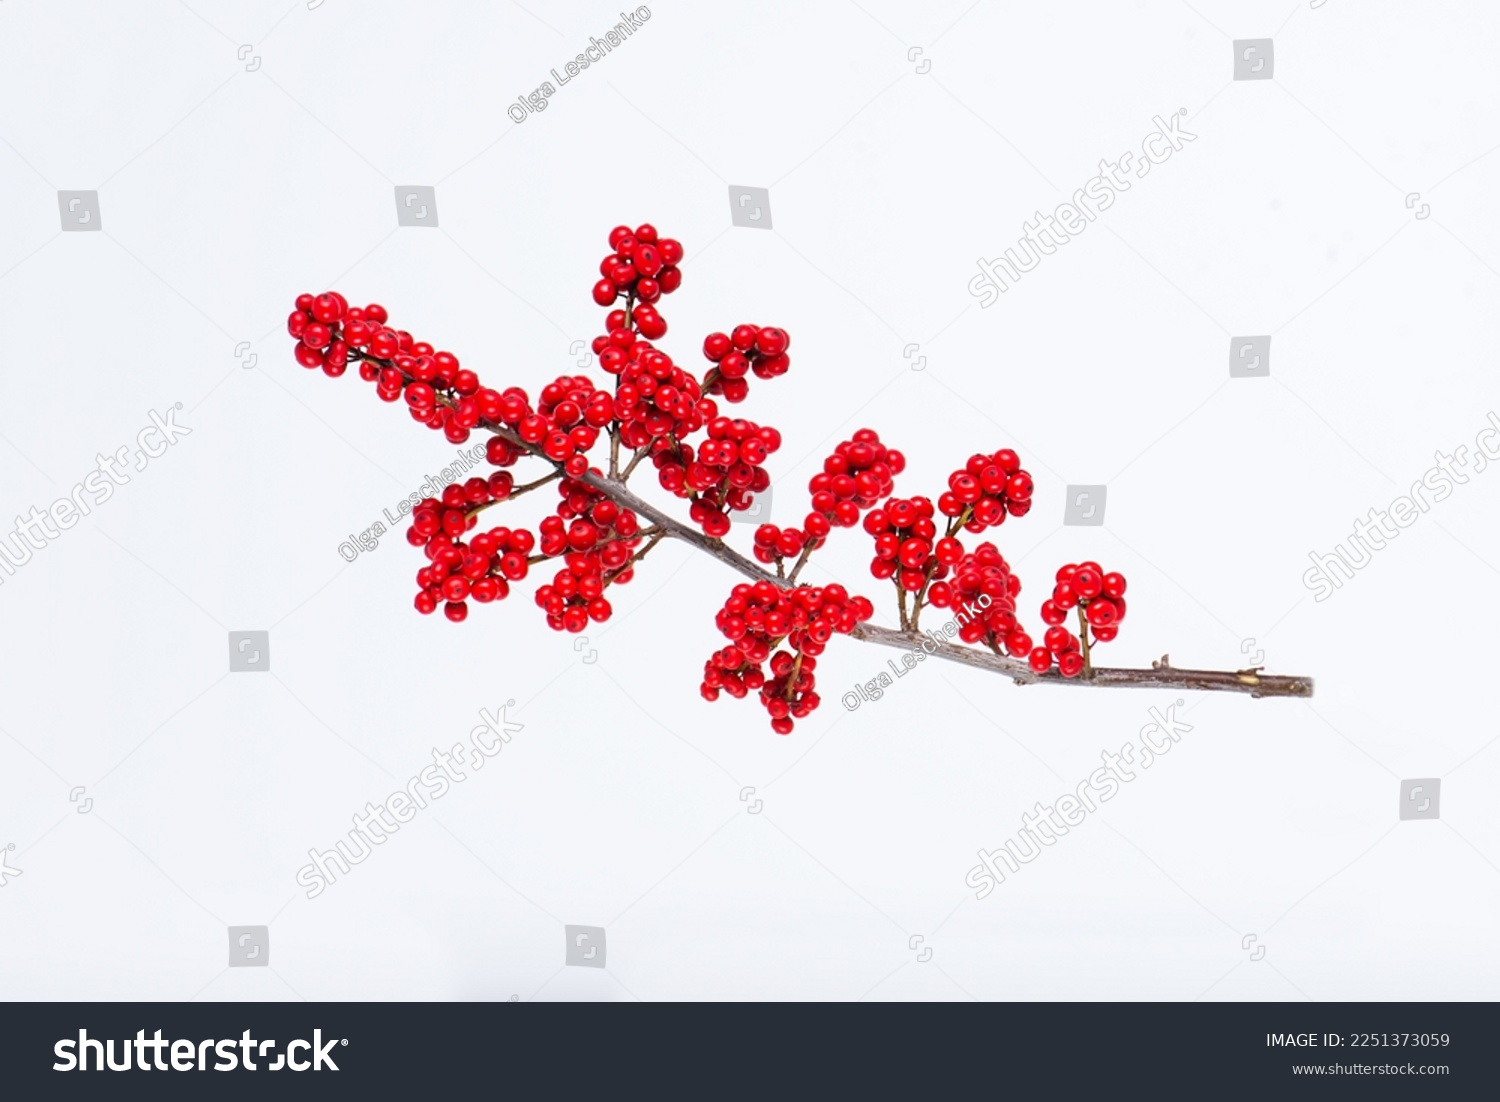 A branch of red berries of Meadow holly (Ilex decidua). Branch of fresh red ilex verticillata, winterberry on a white background. Selective focus. #2251373059